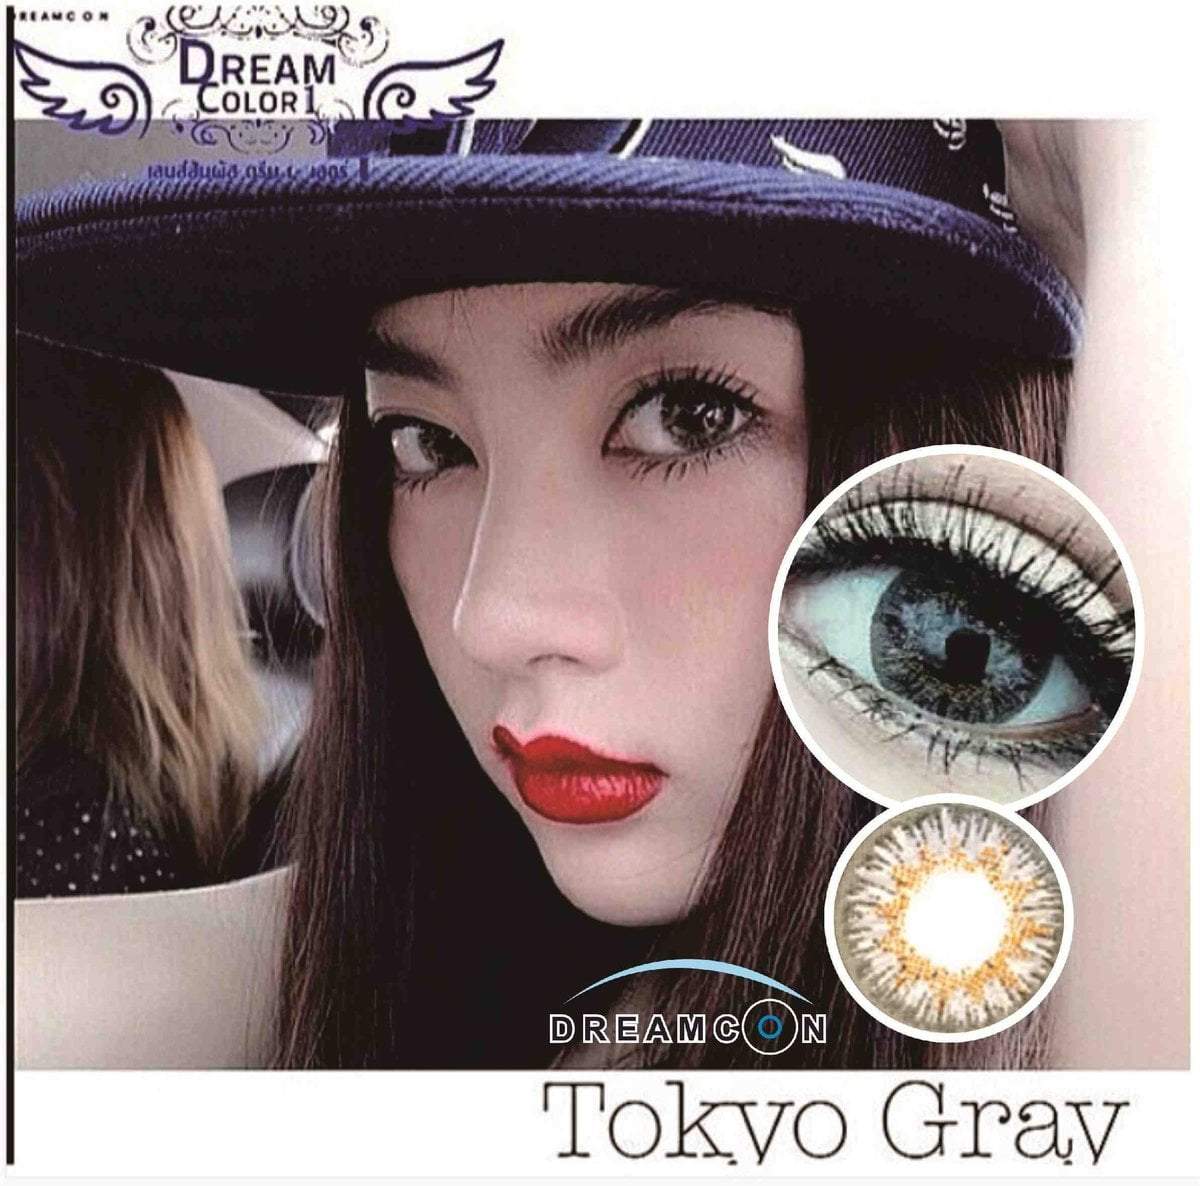 COLORED CONTACTS DREAM COLOR TOKYO GRAY - Lens Beauty Queen